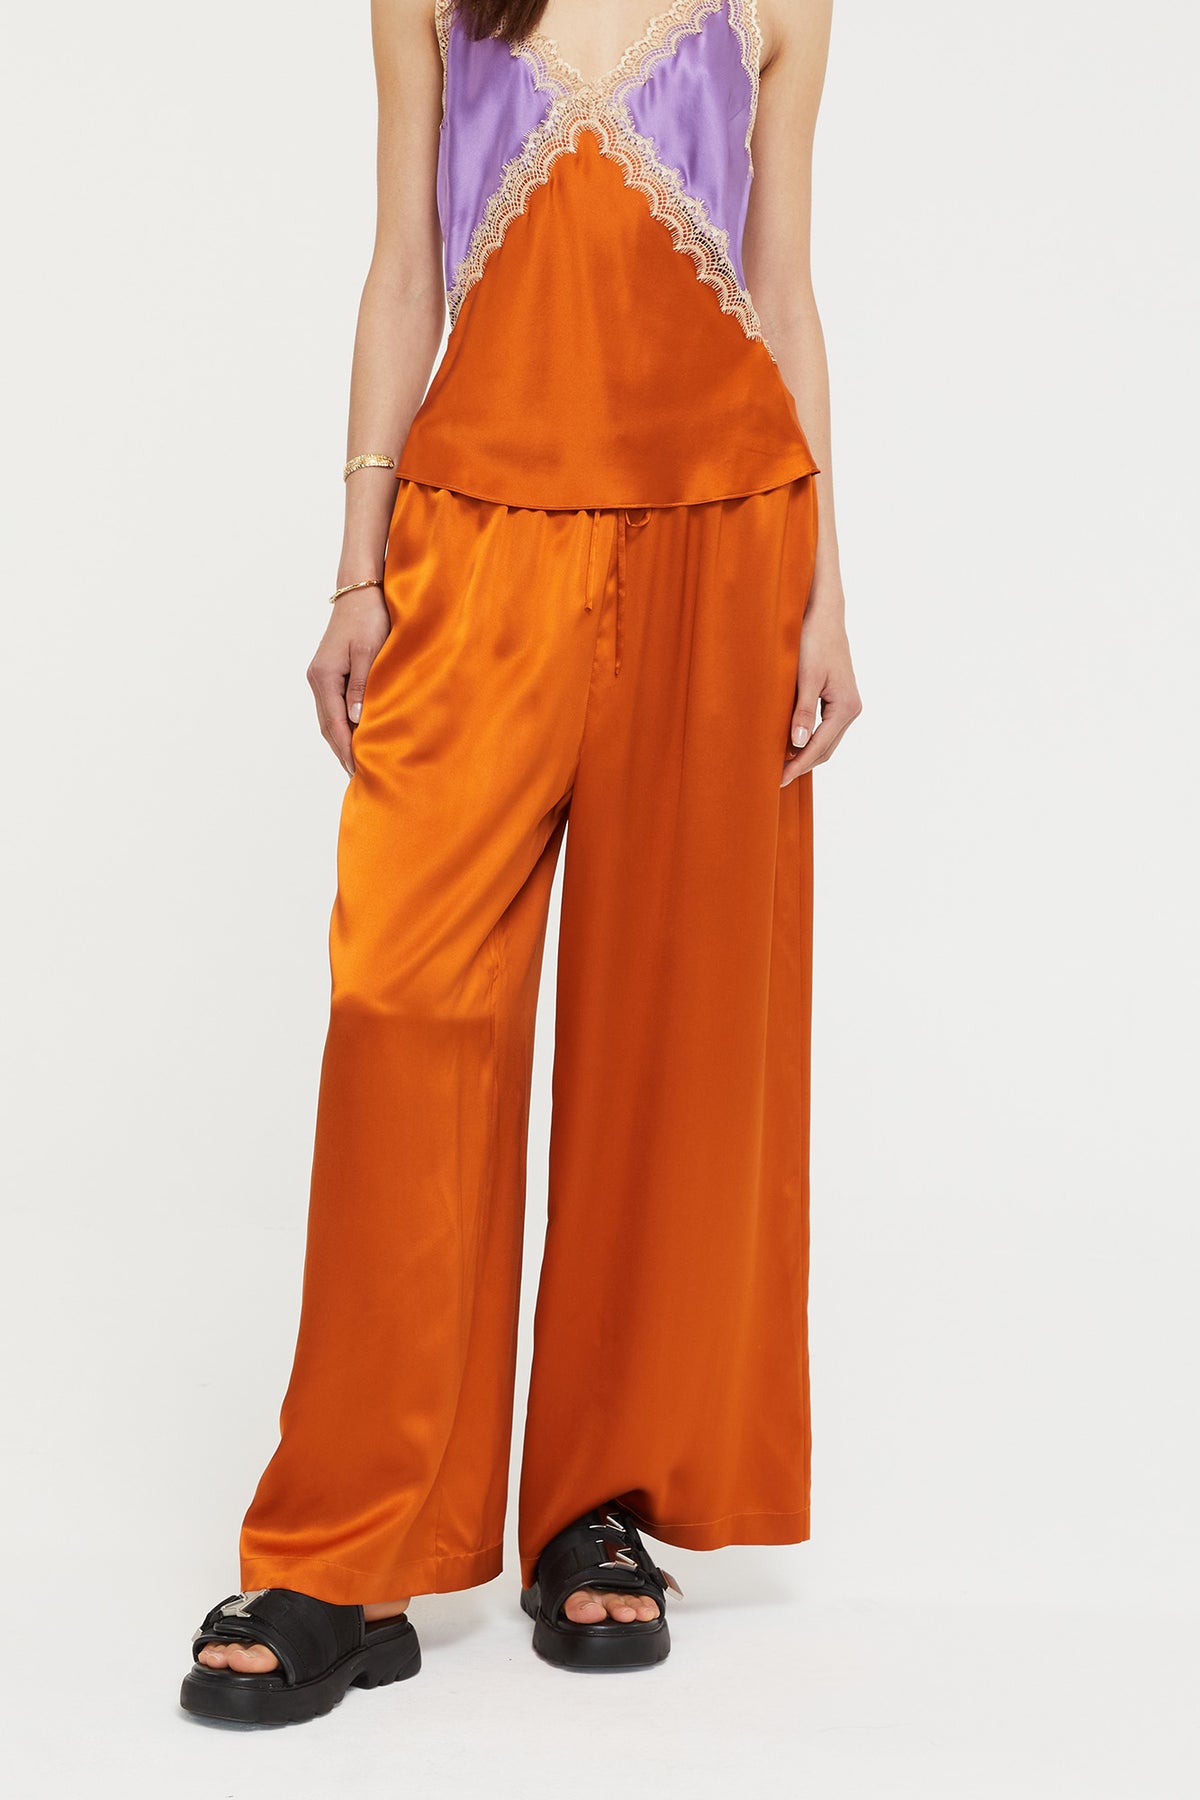 GINIA Amelia Pant in Sunset 19 Momme Silk